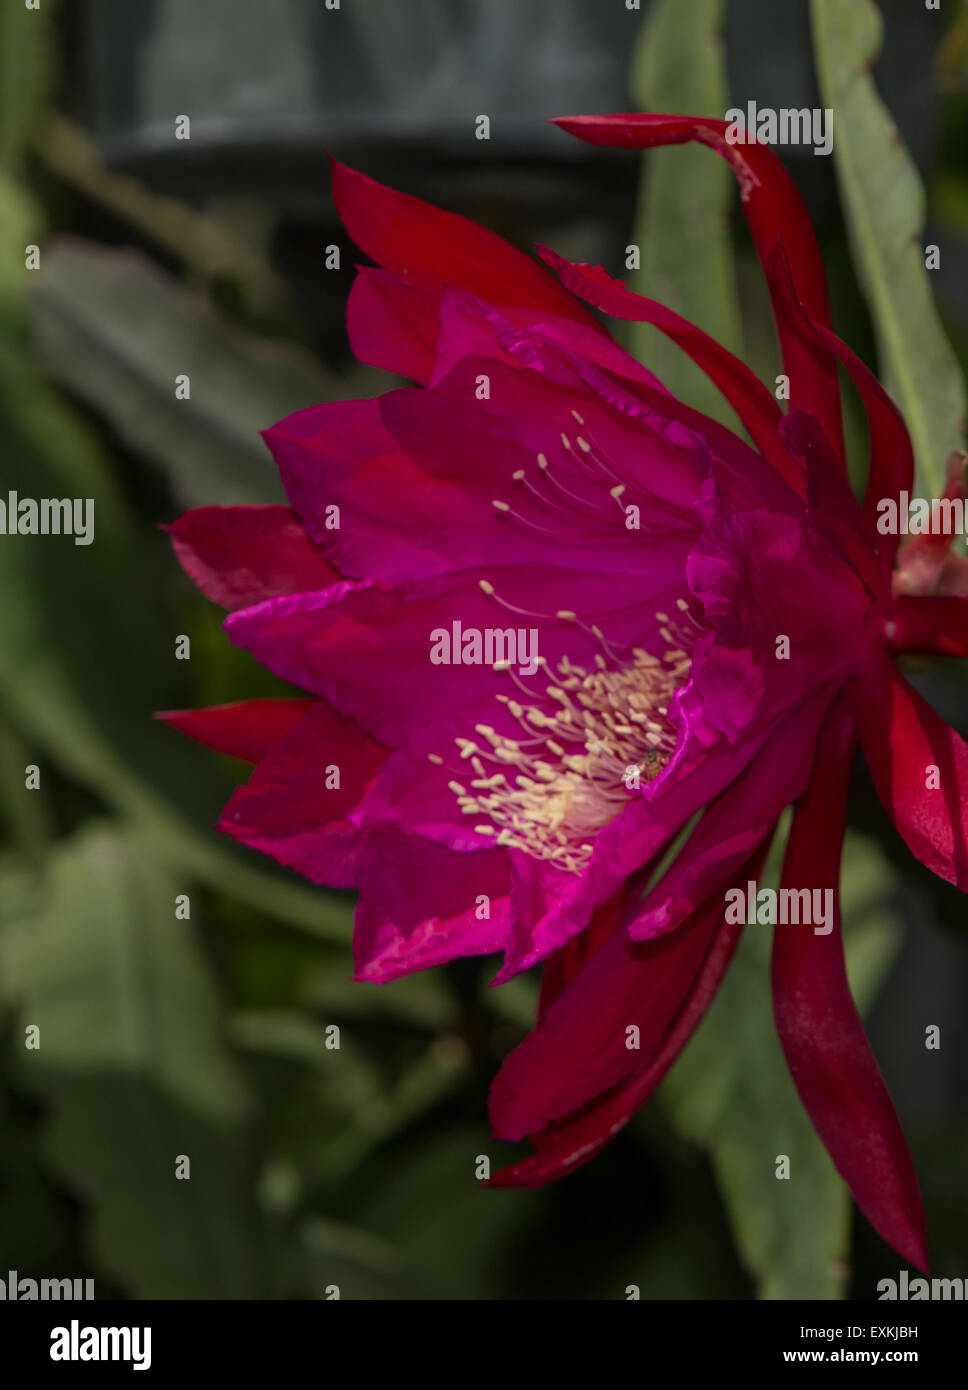 Red orchid cactus flower, Epiphyllum ackermannii, blooms in a garden in spring Stock Photo